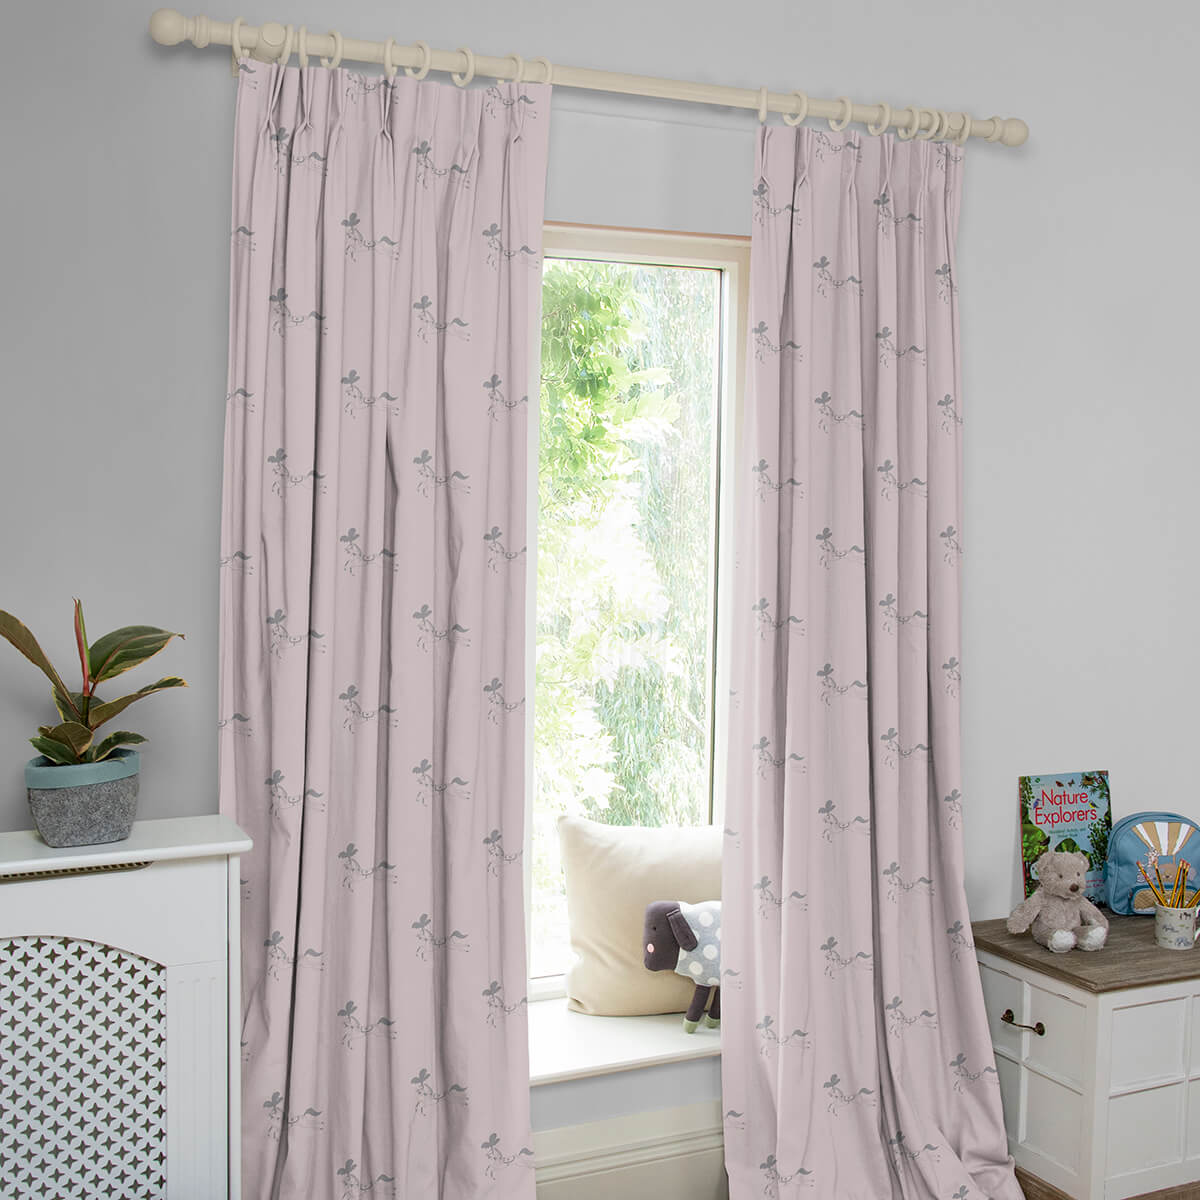 Fairground Ponies Soft Pink Made to Measure Curtains